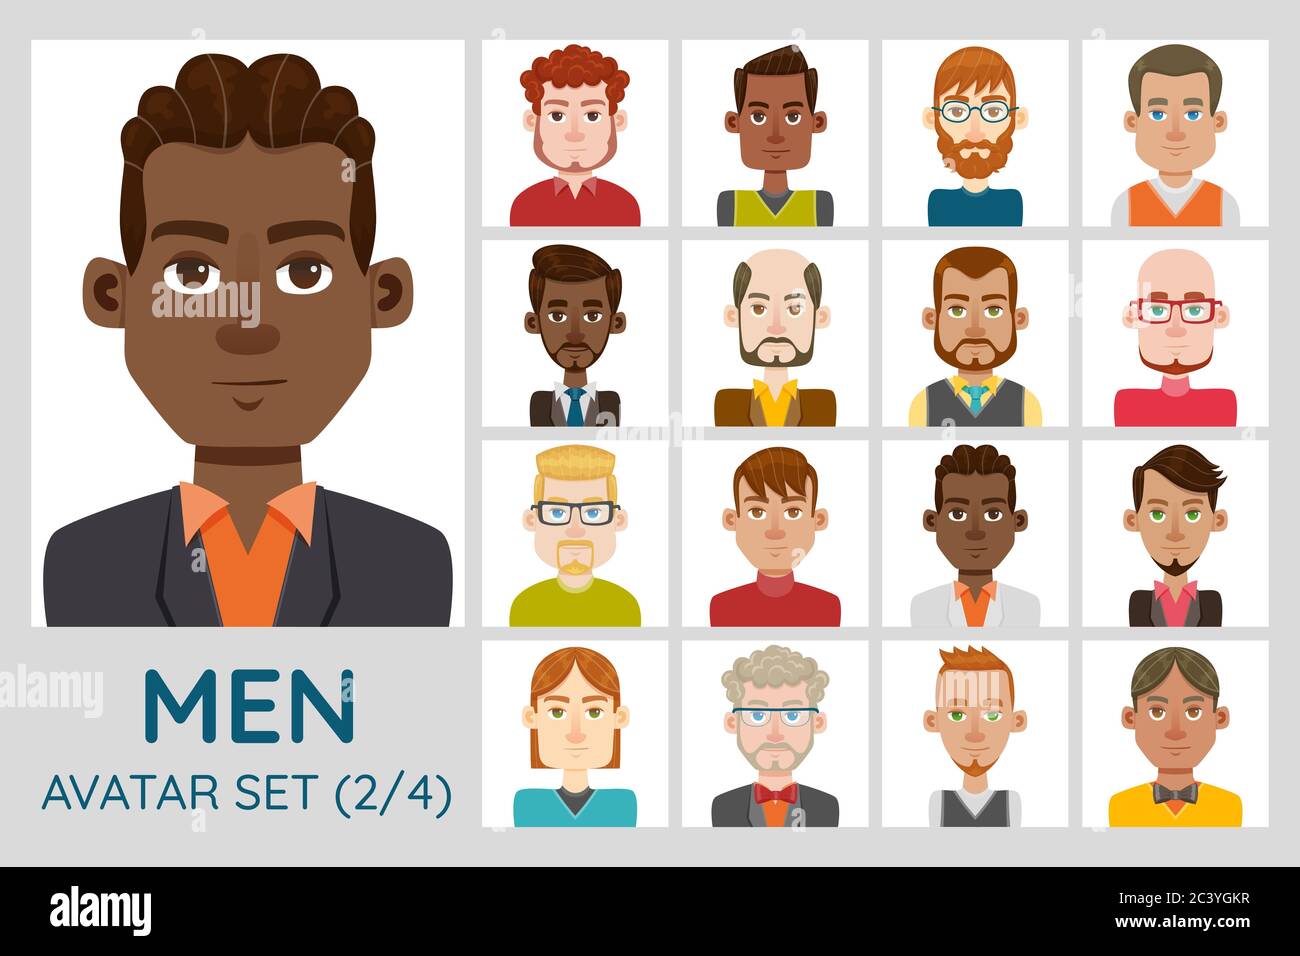 Male avatar set. Collection of 16 avatars with different hairstyles, face shapes, skin color and clothing. Set 2 of 4. Stock Vector